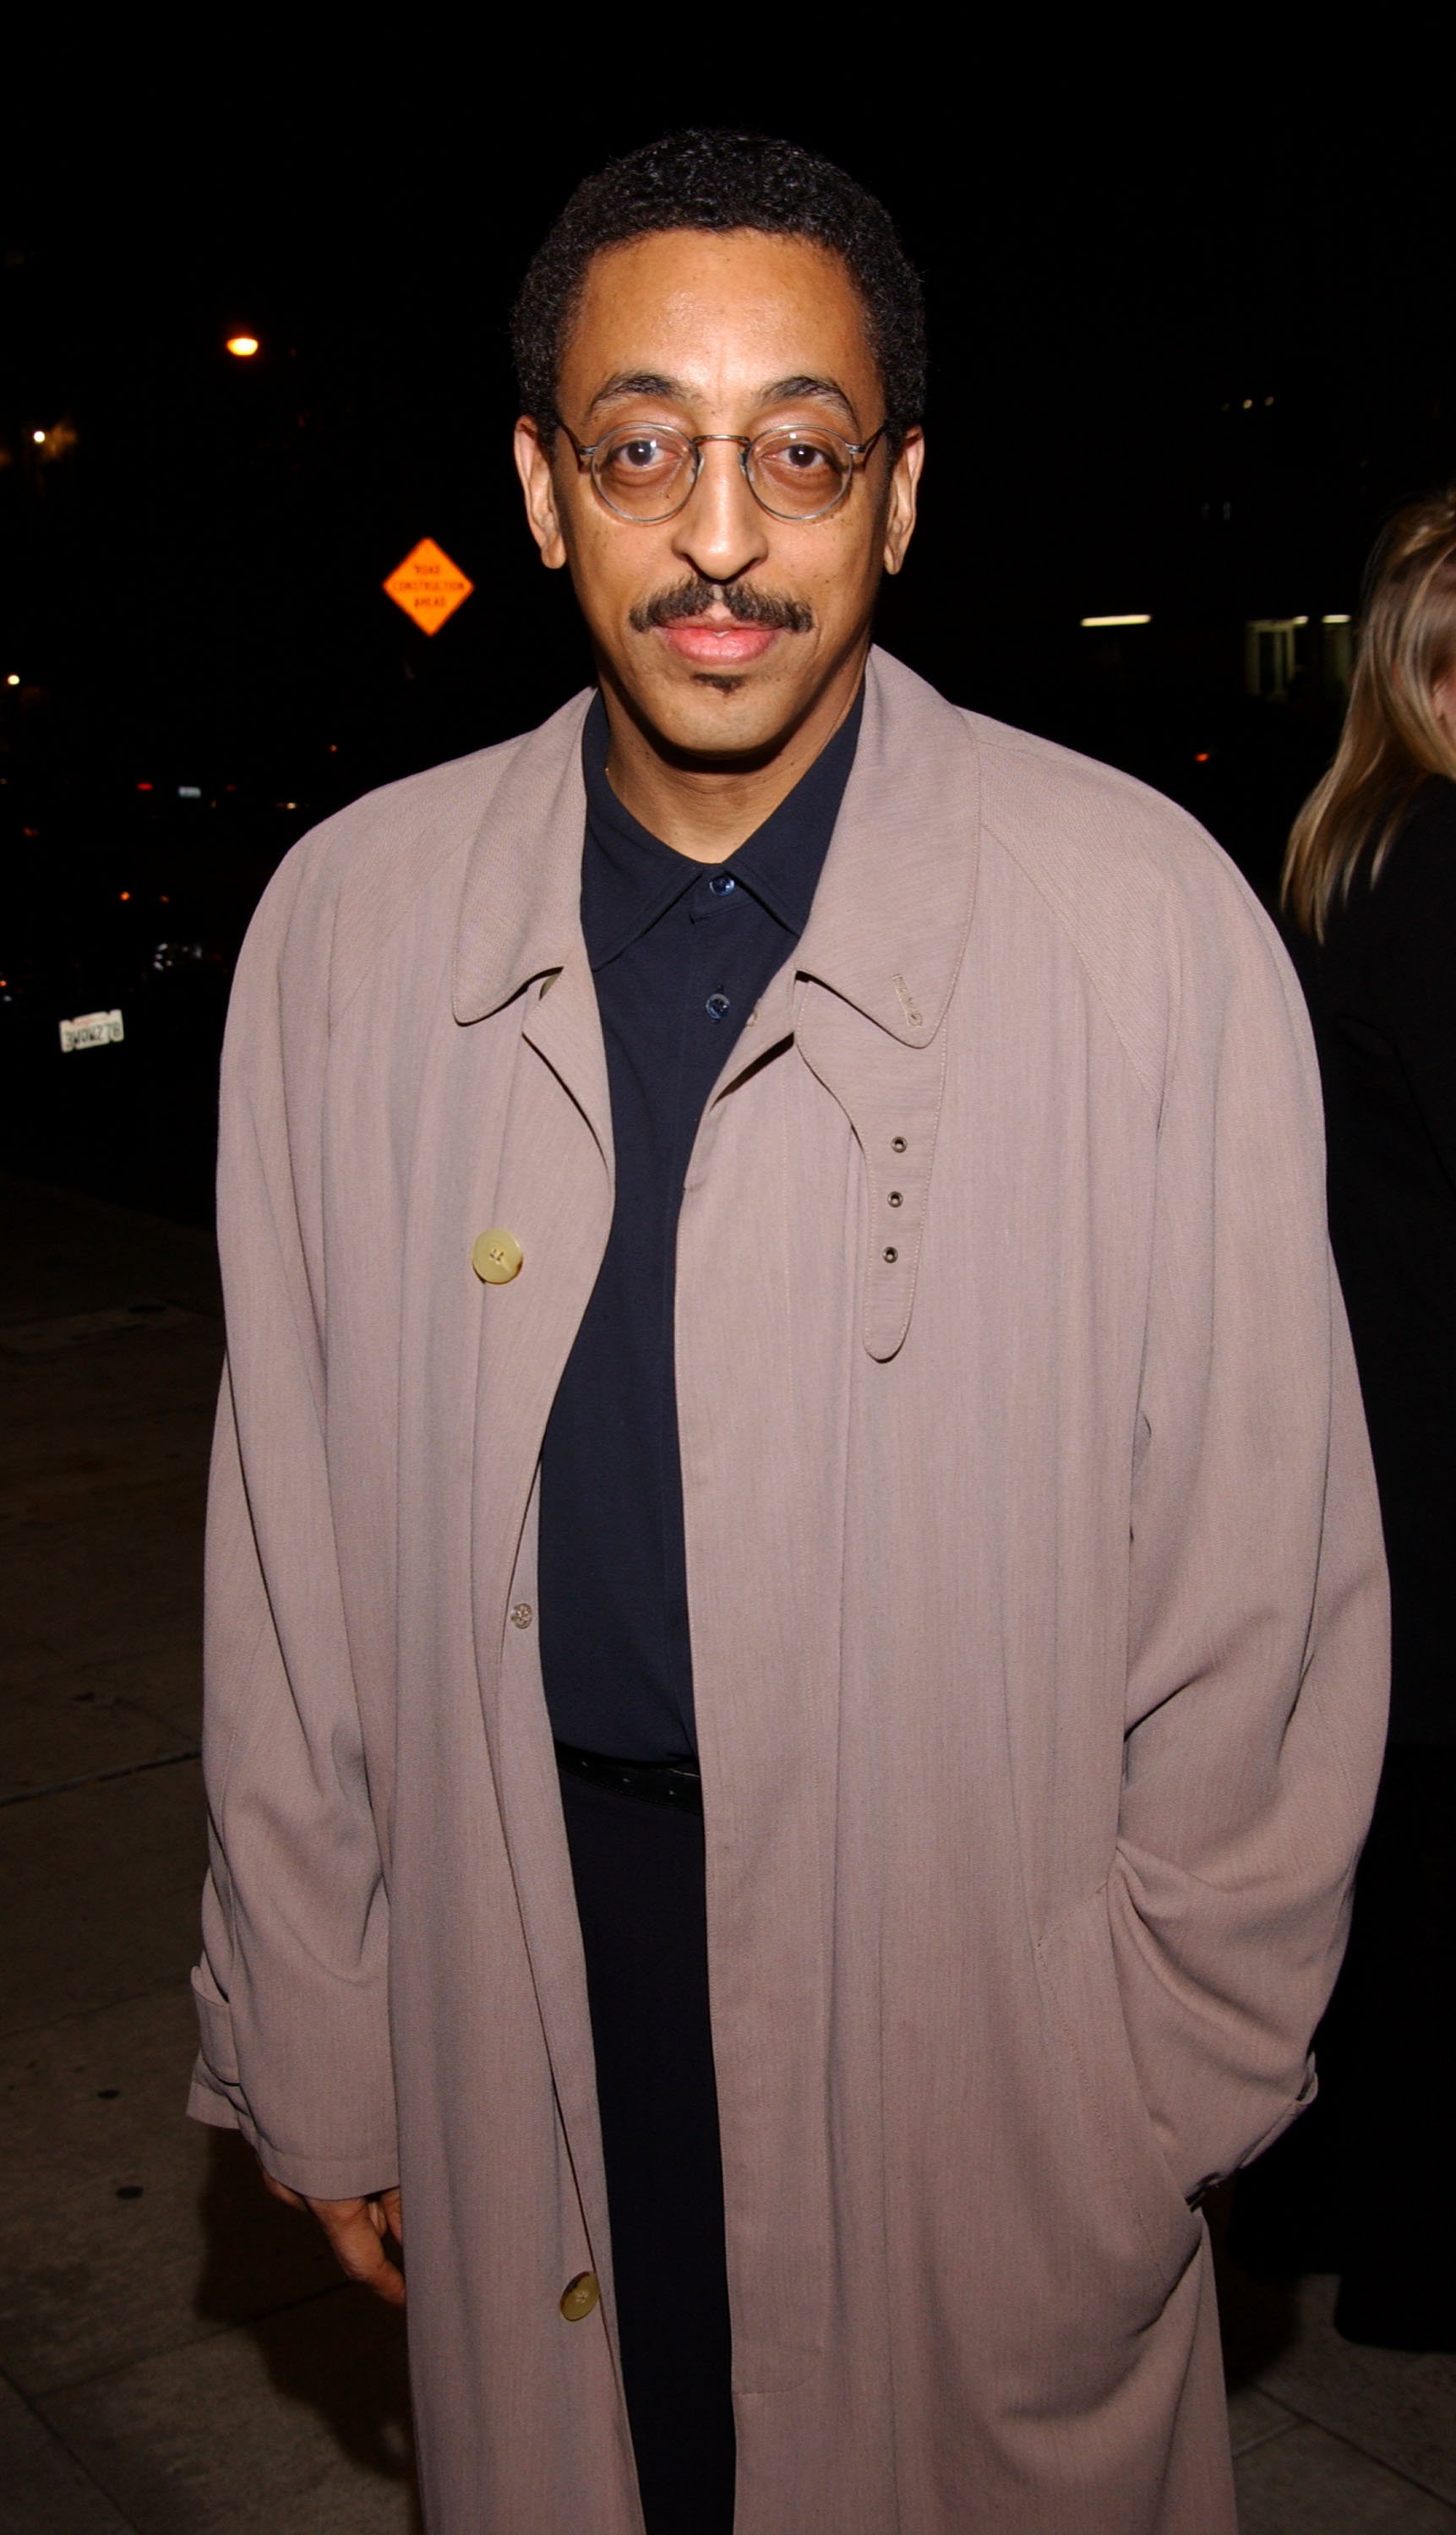 Gregory Hines arrives at the premiere of Showtimes "The Red Sneakers" January 29, 2002. | Photo: Getty Images